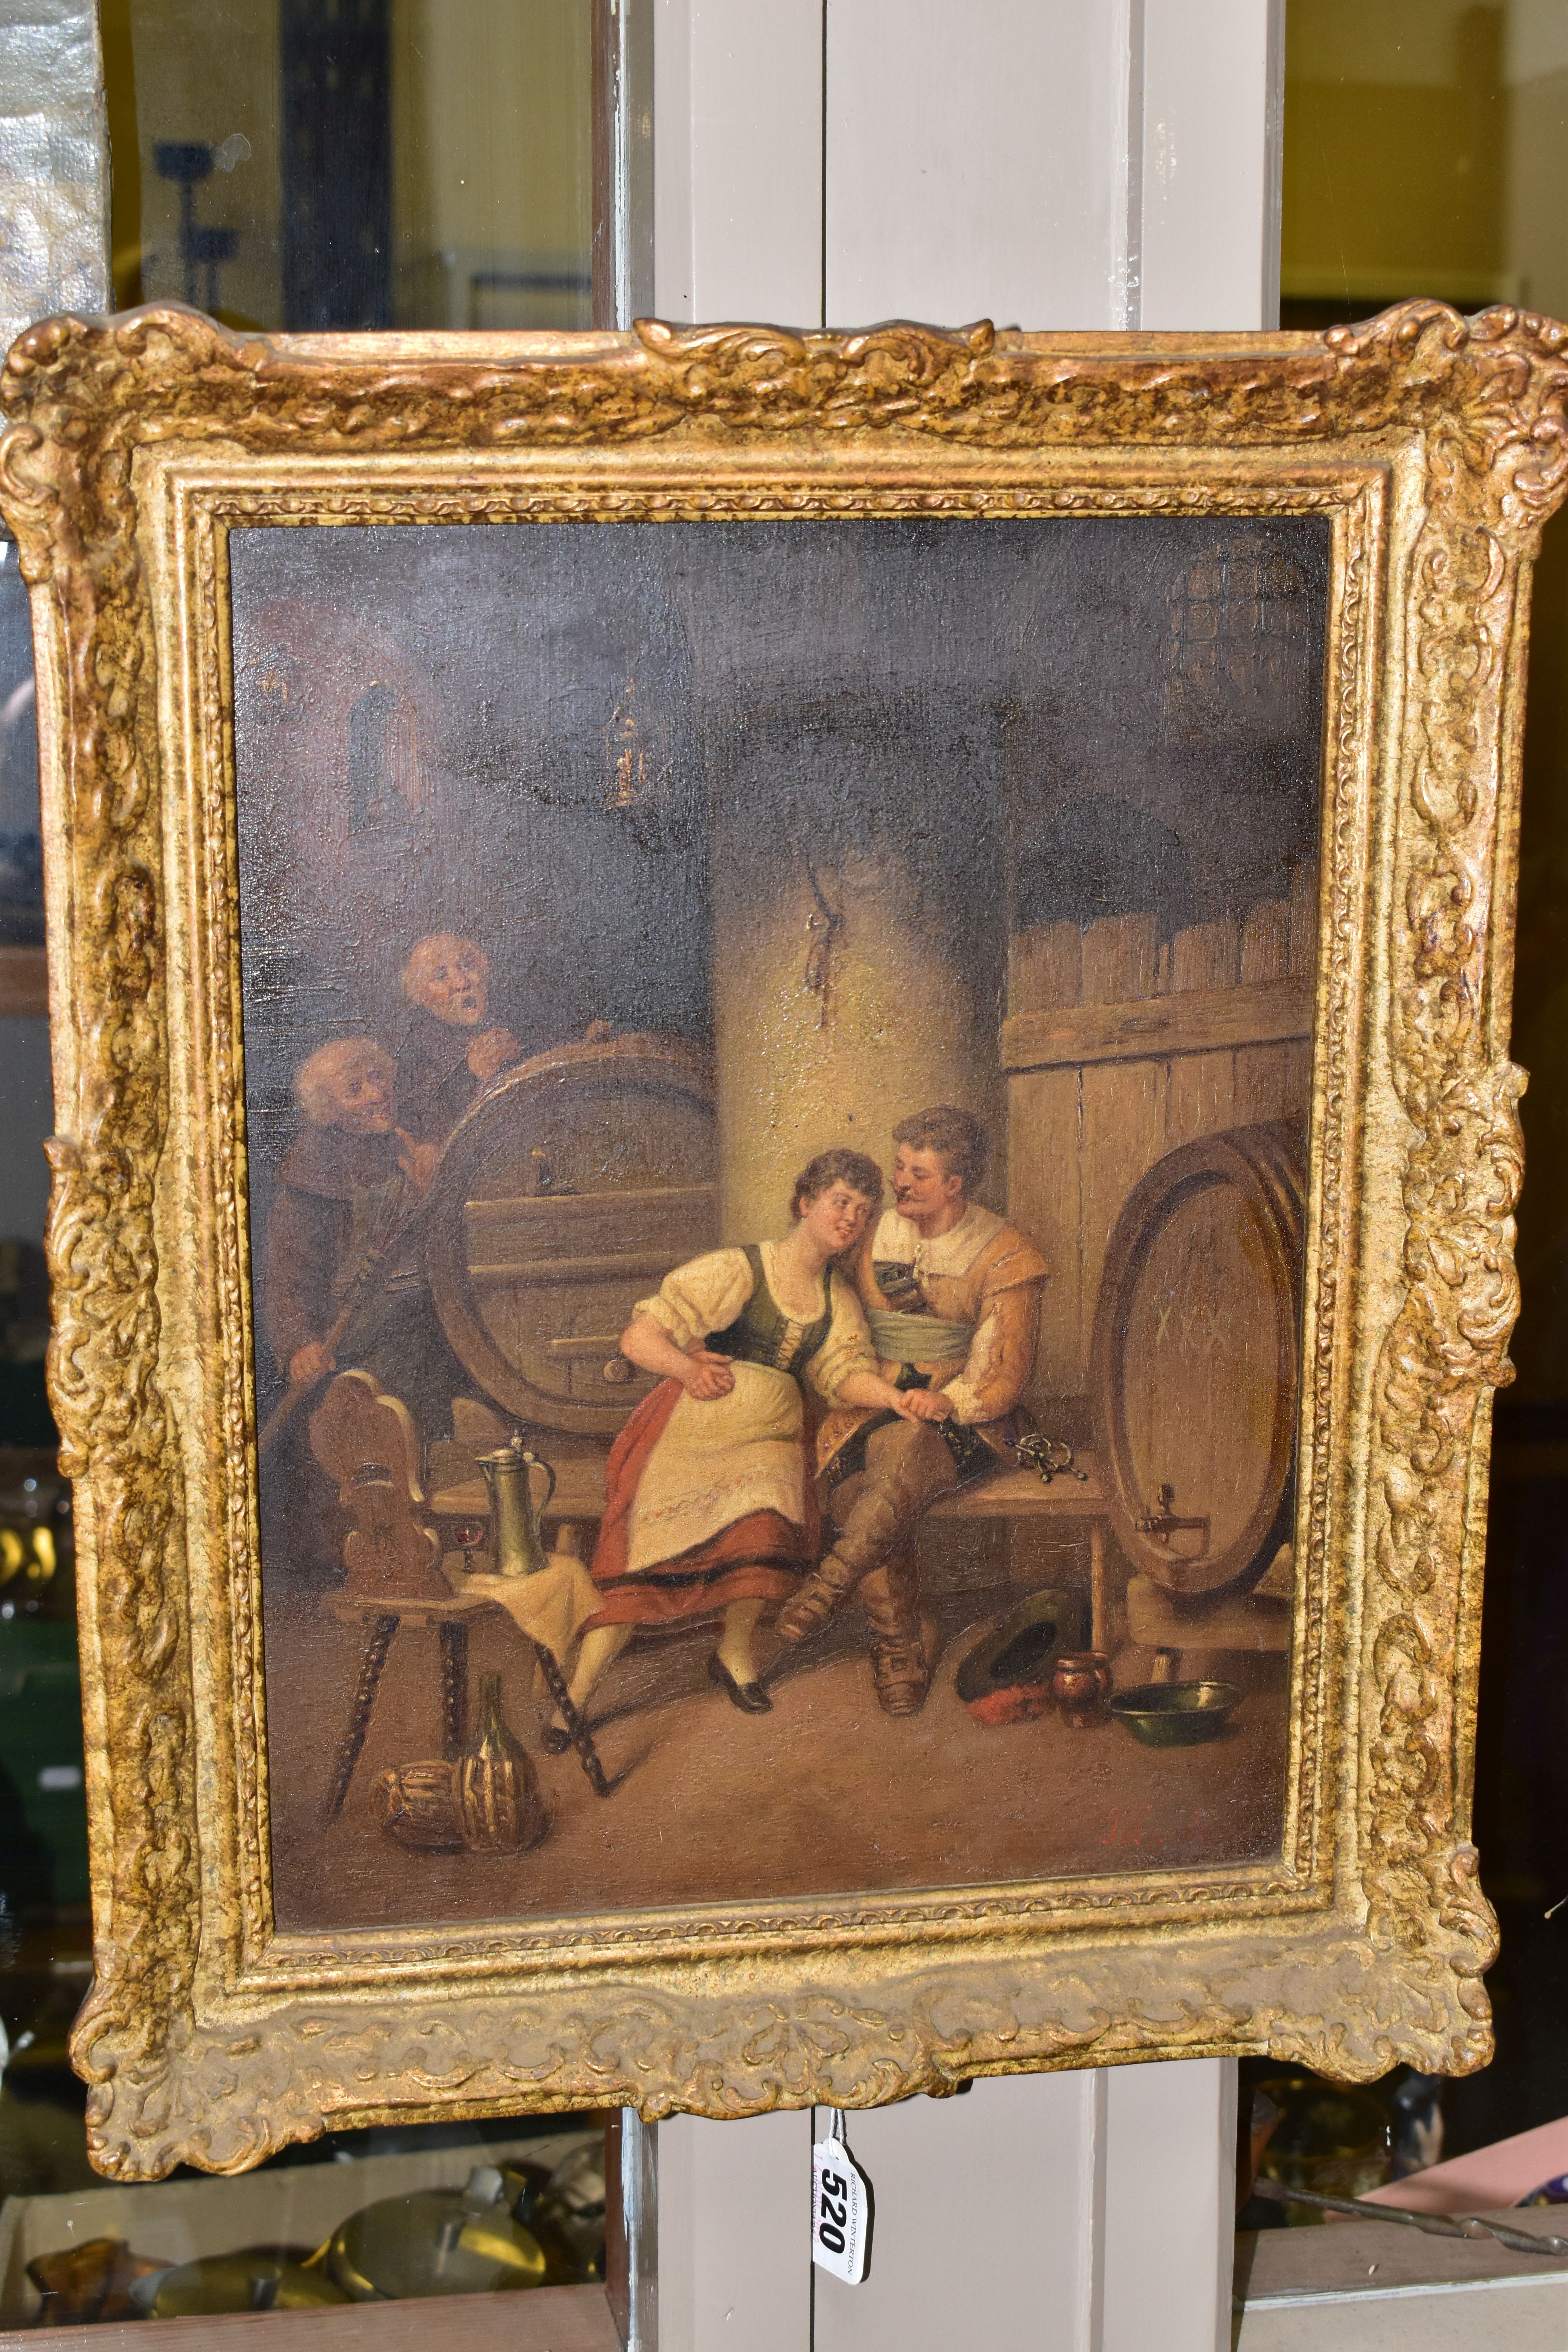 A LATE 19TH / EARLY 20TH CENTURY TAVERN SCENE, depicting a courting couple seated beside barrels,